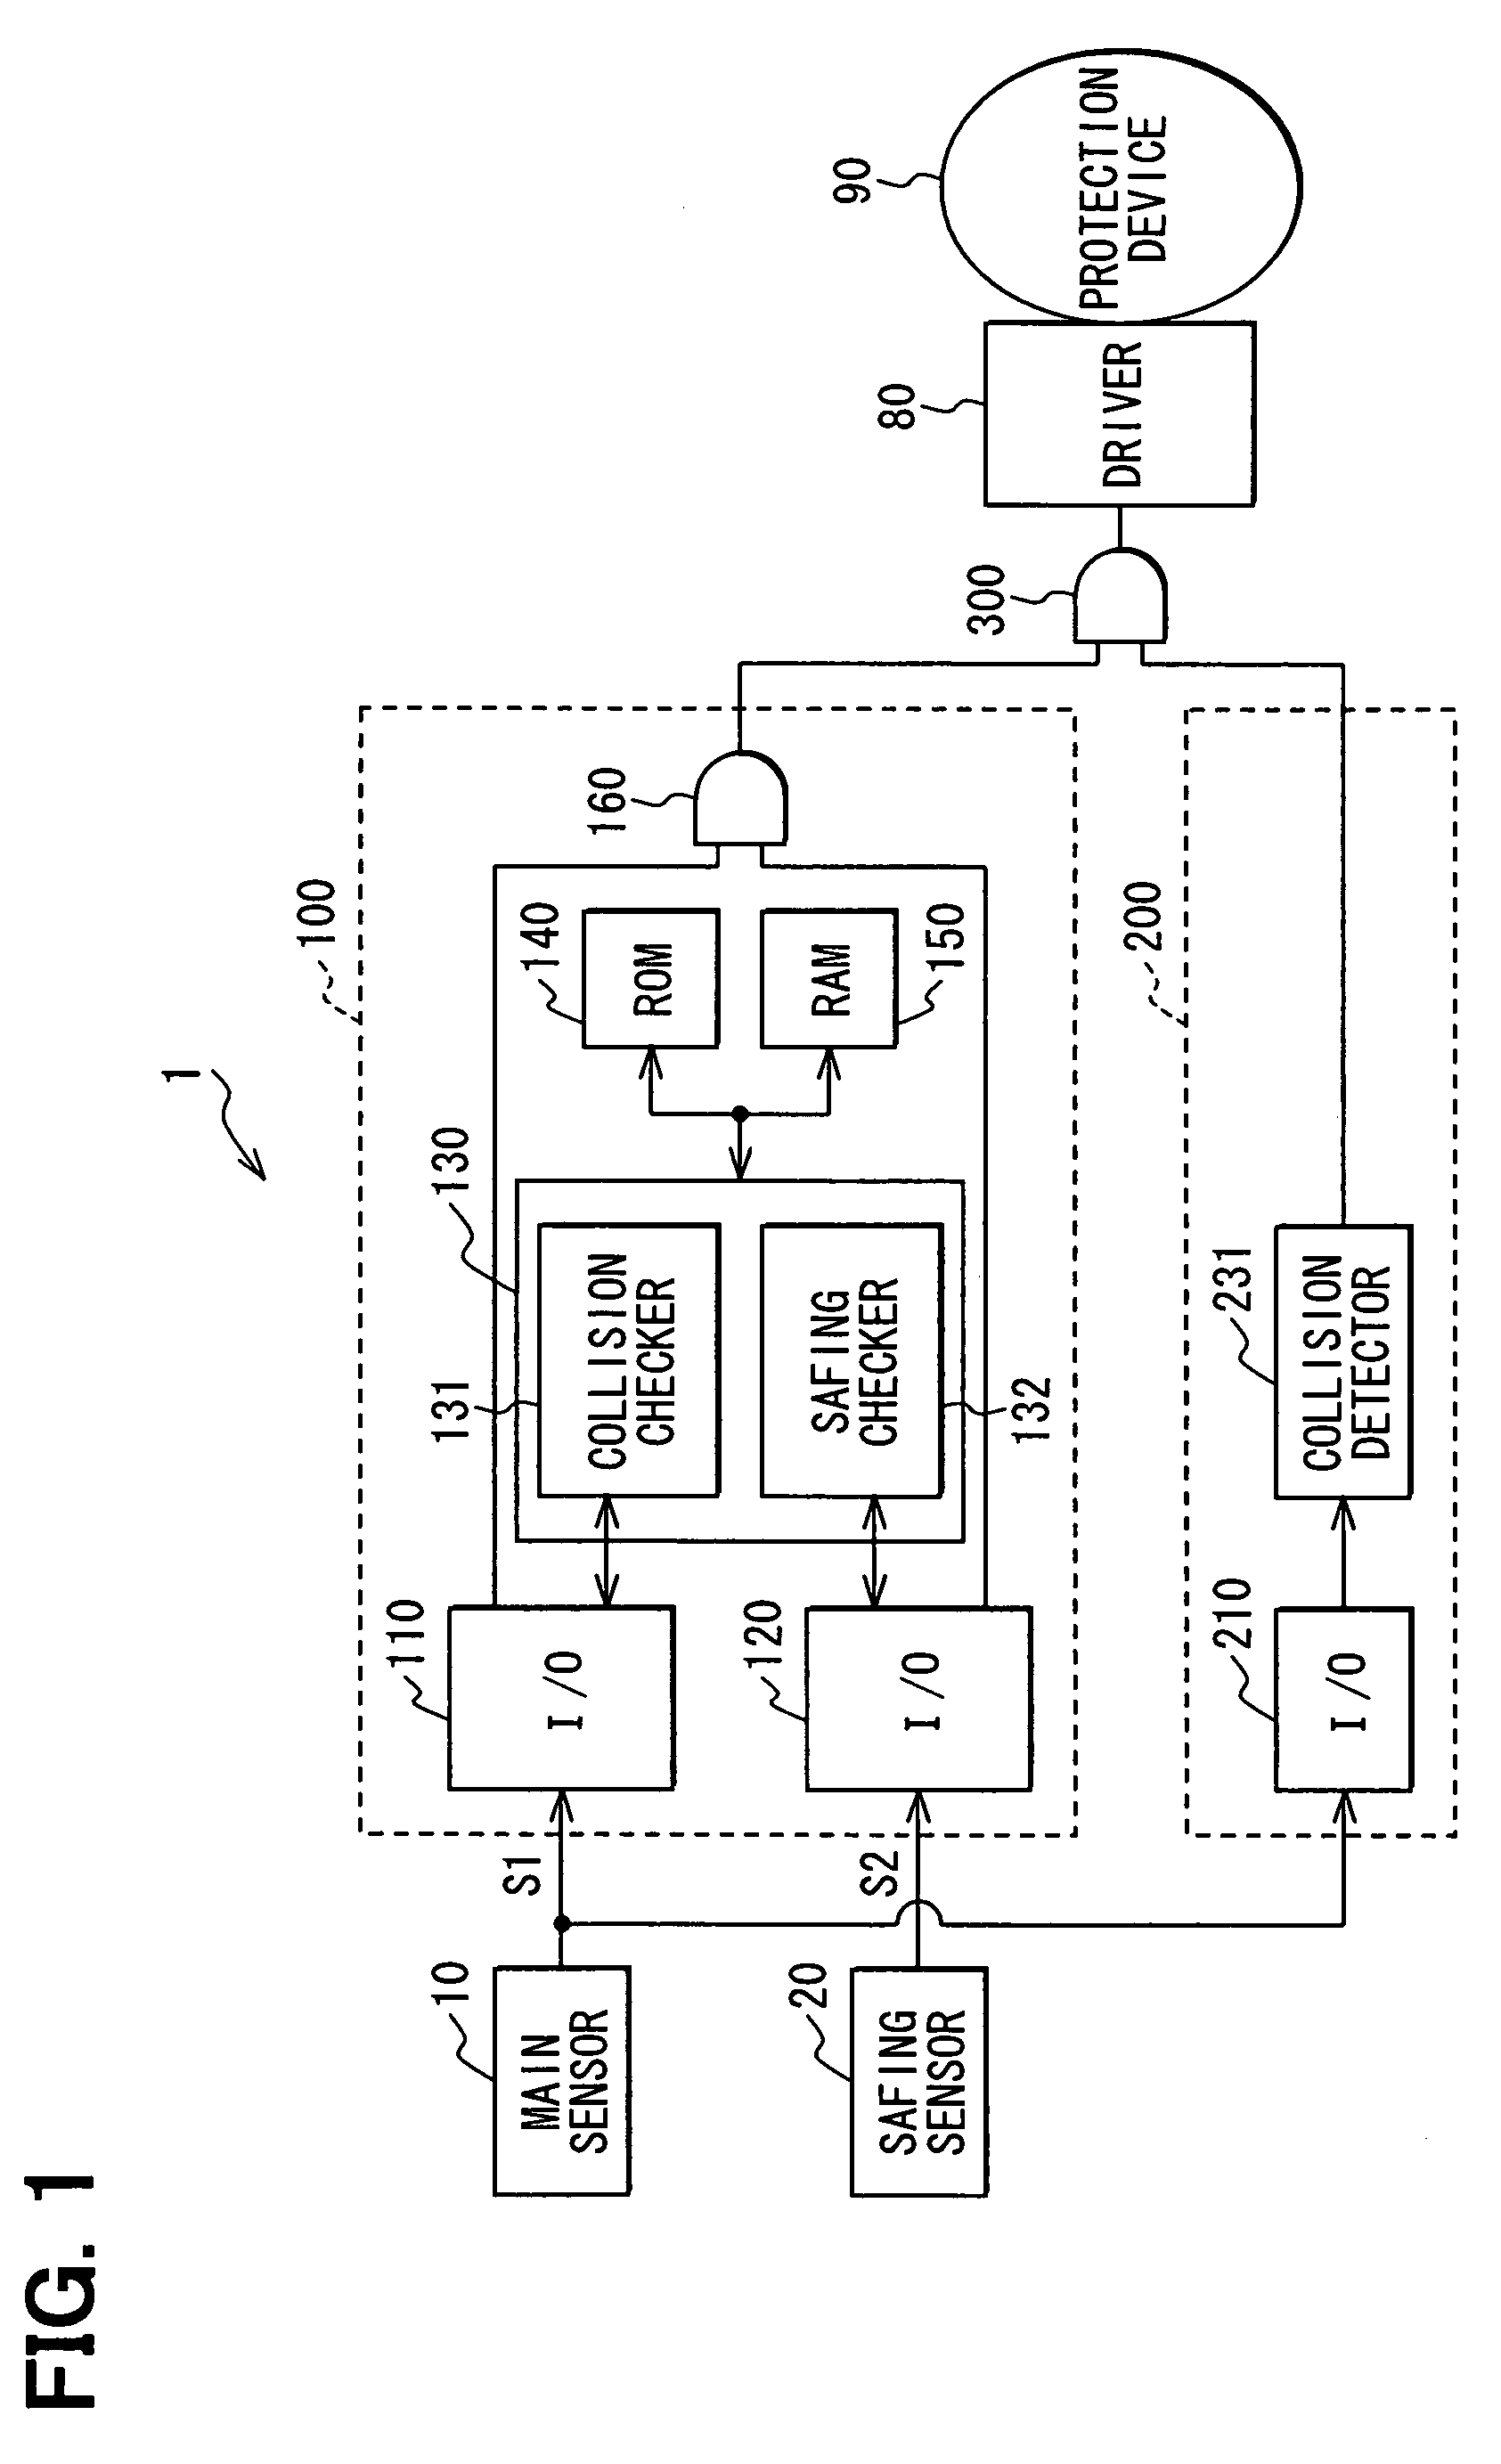 Protection device activation controller